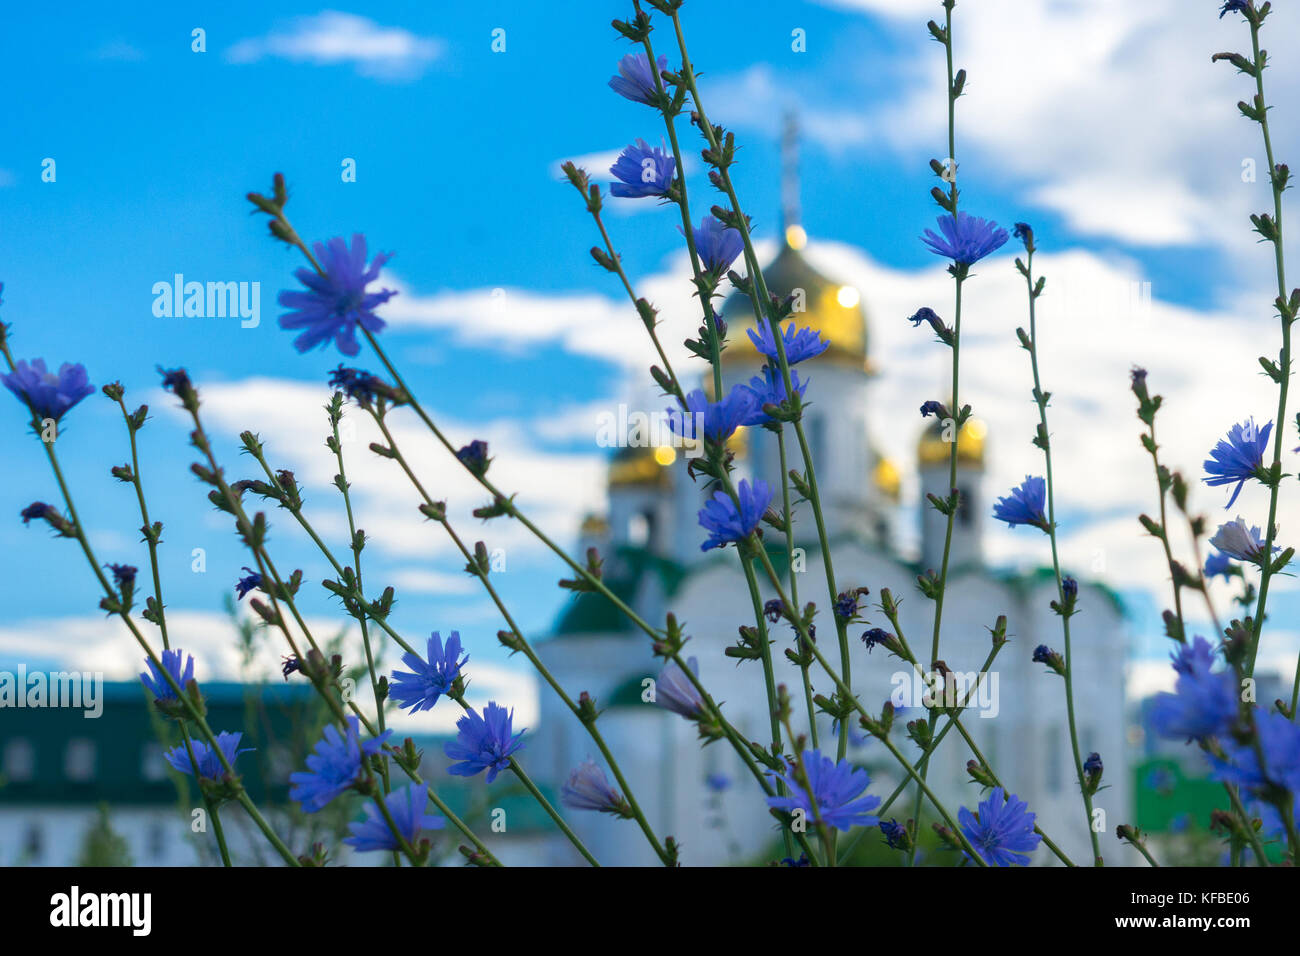 Blue summer flowers on the background of blurred shining golden domes of a Russian Orthodox Church against white clouds on blue sky Stock Photo